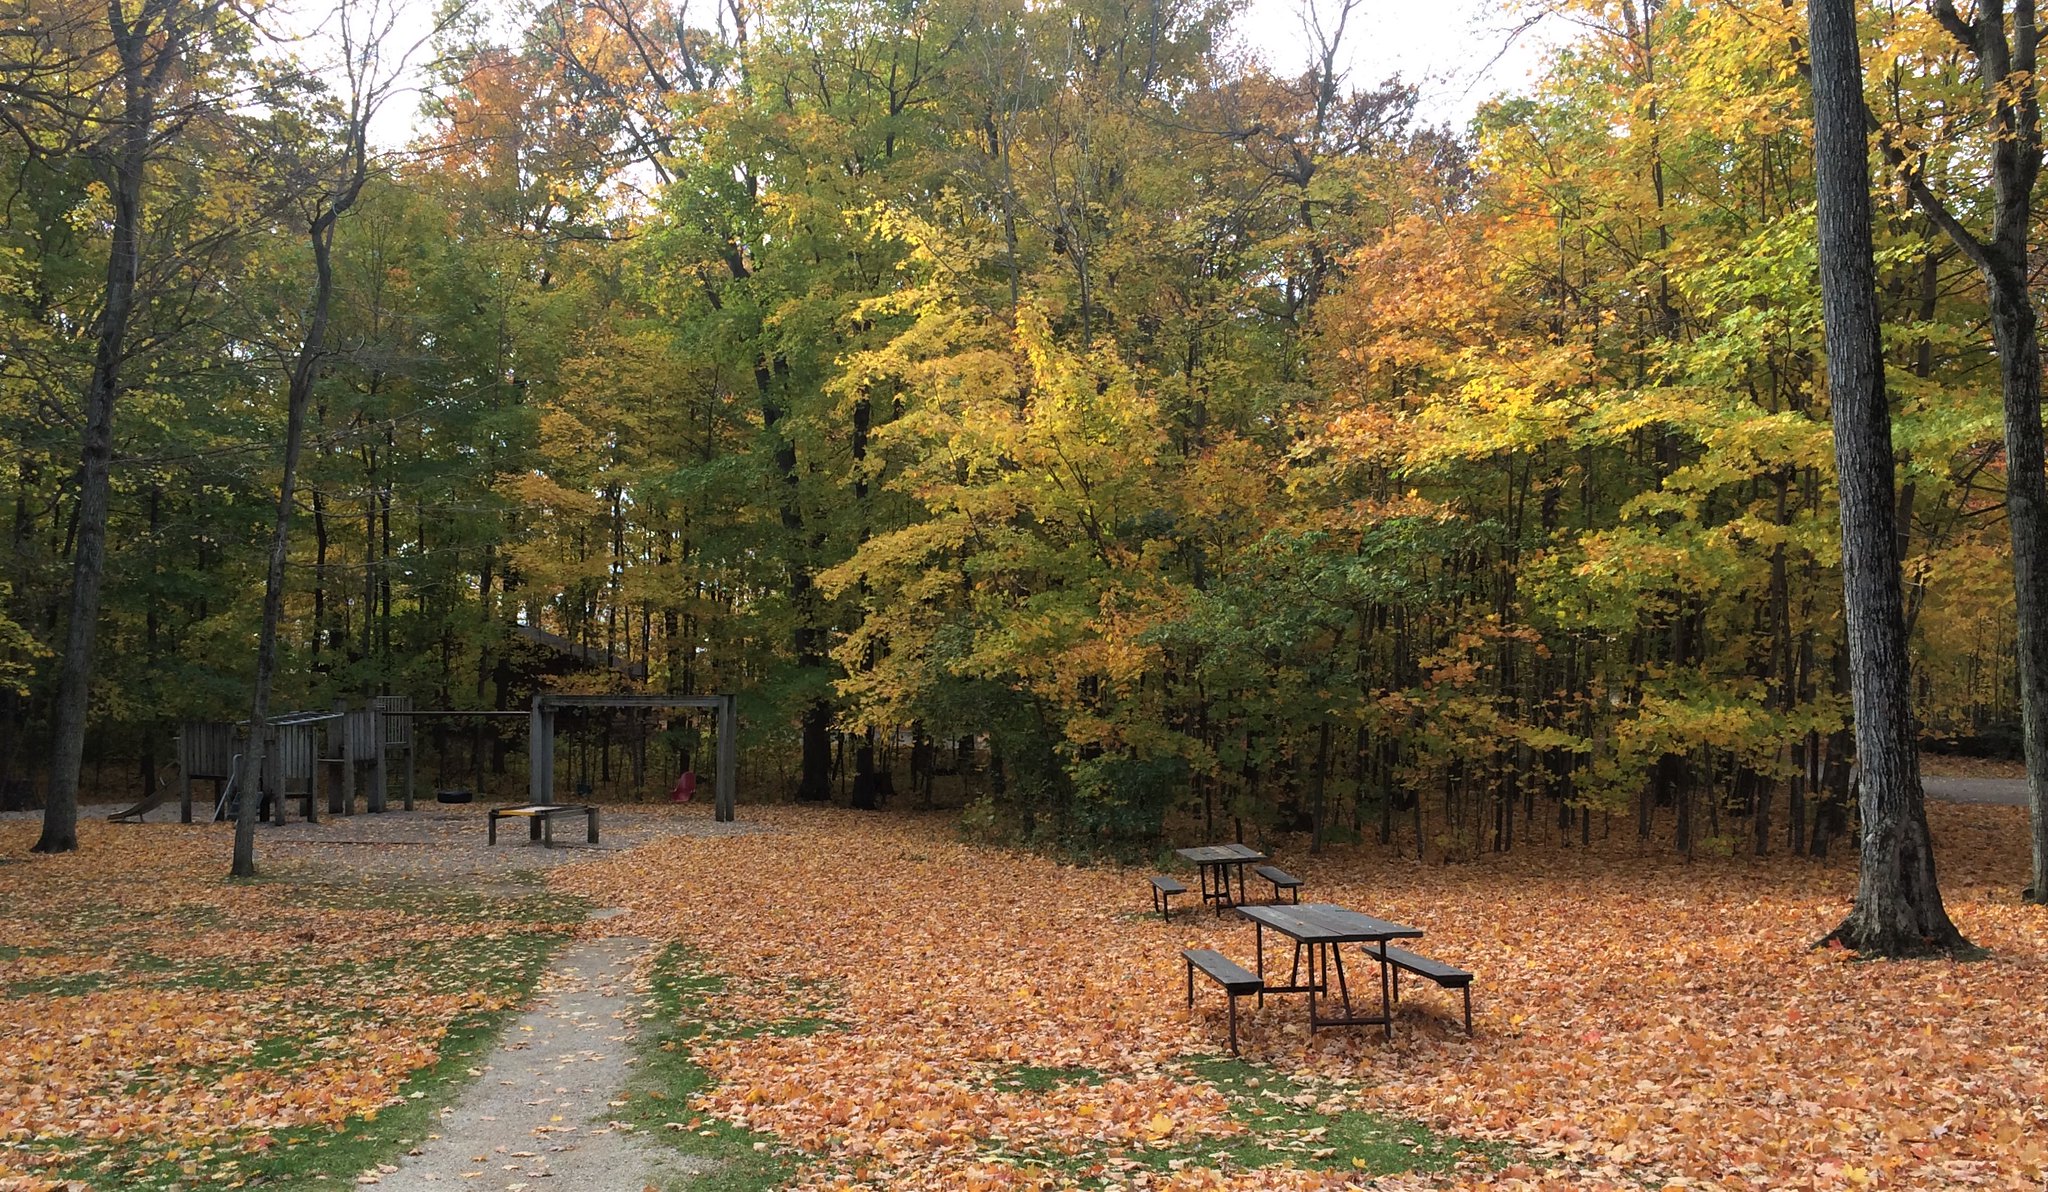 Playground equipment on a bed of woodchips in a park and two picnic tables. Branches of trees with red, orange, and yellow leaves hang overhead.